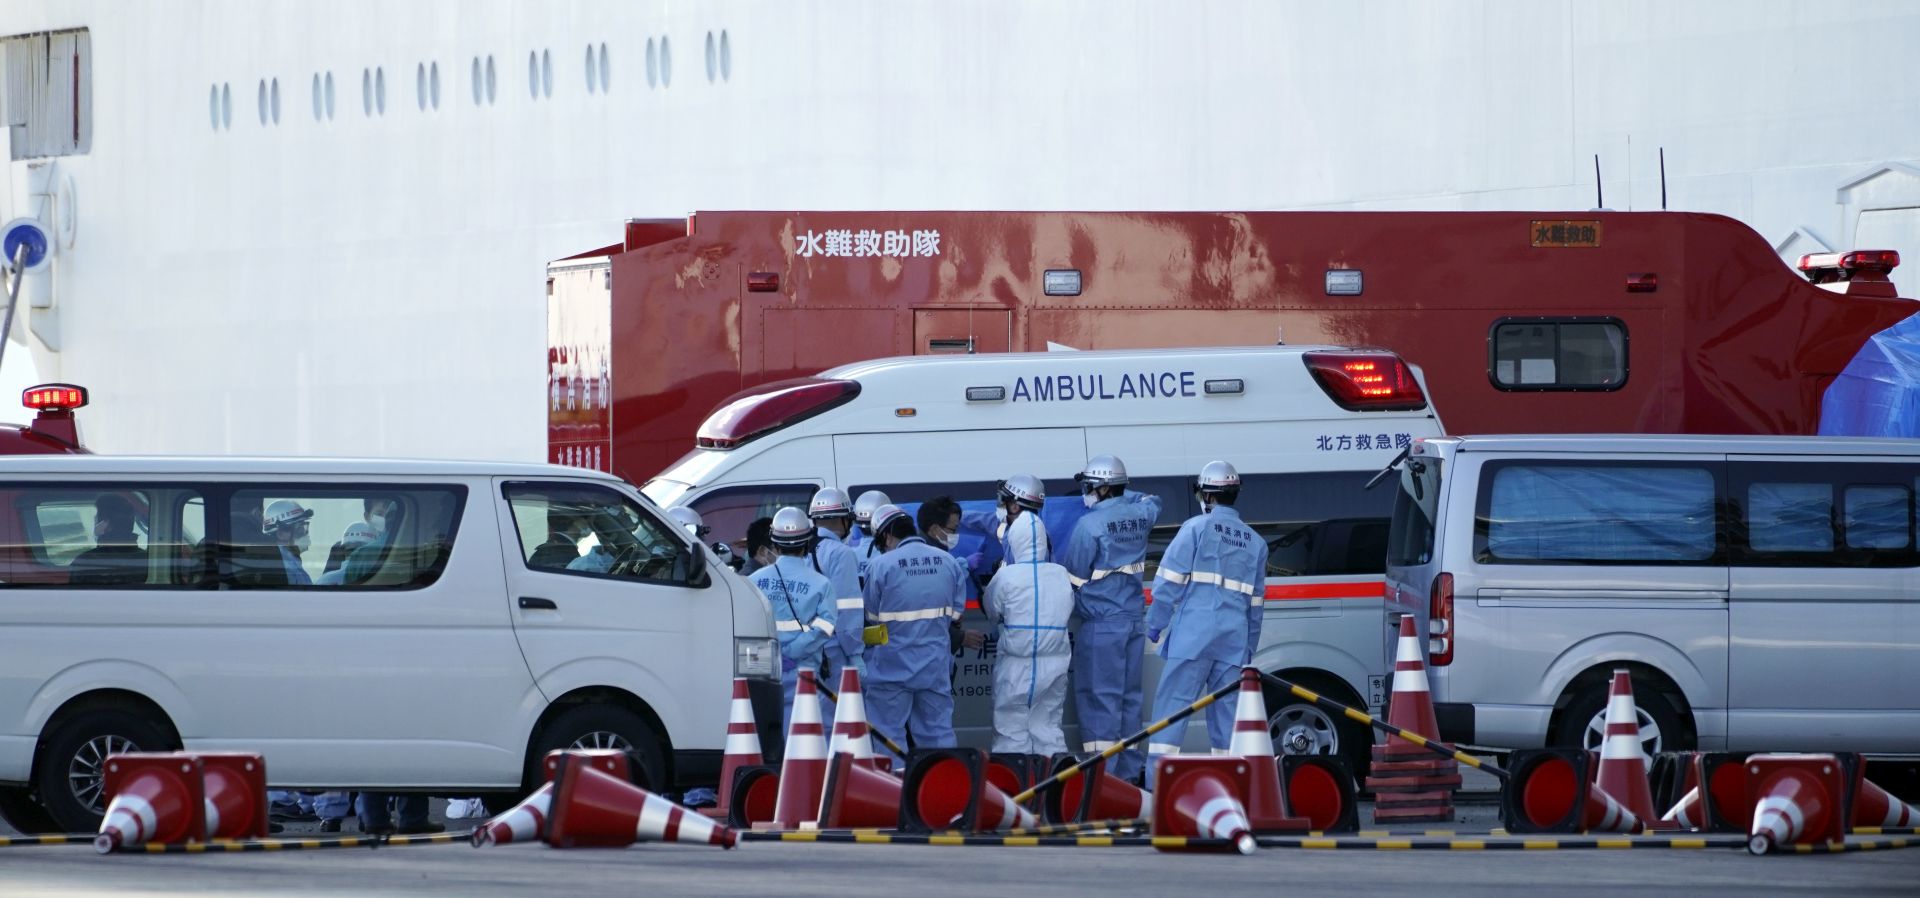 epa08196678 Rescue members gather around an ambulance parked before the Diamond Princess cruise ship at the port of Yokohama in Yokohama, Japan, 06 February 2020. The cruise ship with around 3,700 passengers on board docked in the morning to restock supplies. According to latest media reports, 10 more people have tested positive for the new coronavirus. A total number of 20 people from the ship have been infected by the coronavirus, raising the number of infections to 45 in Japan. According to media reports, around 28,000 people are infected and at least 563 have died from coronavirus.  EPA/FRANCK ROBICHON